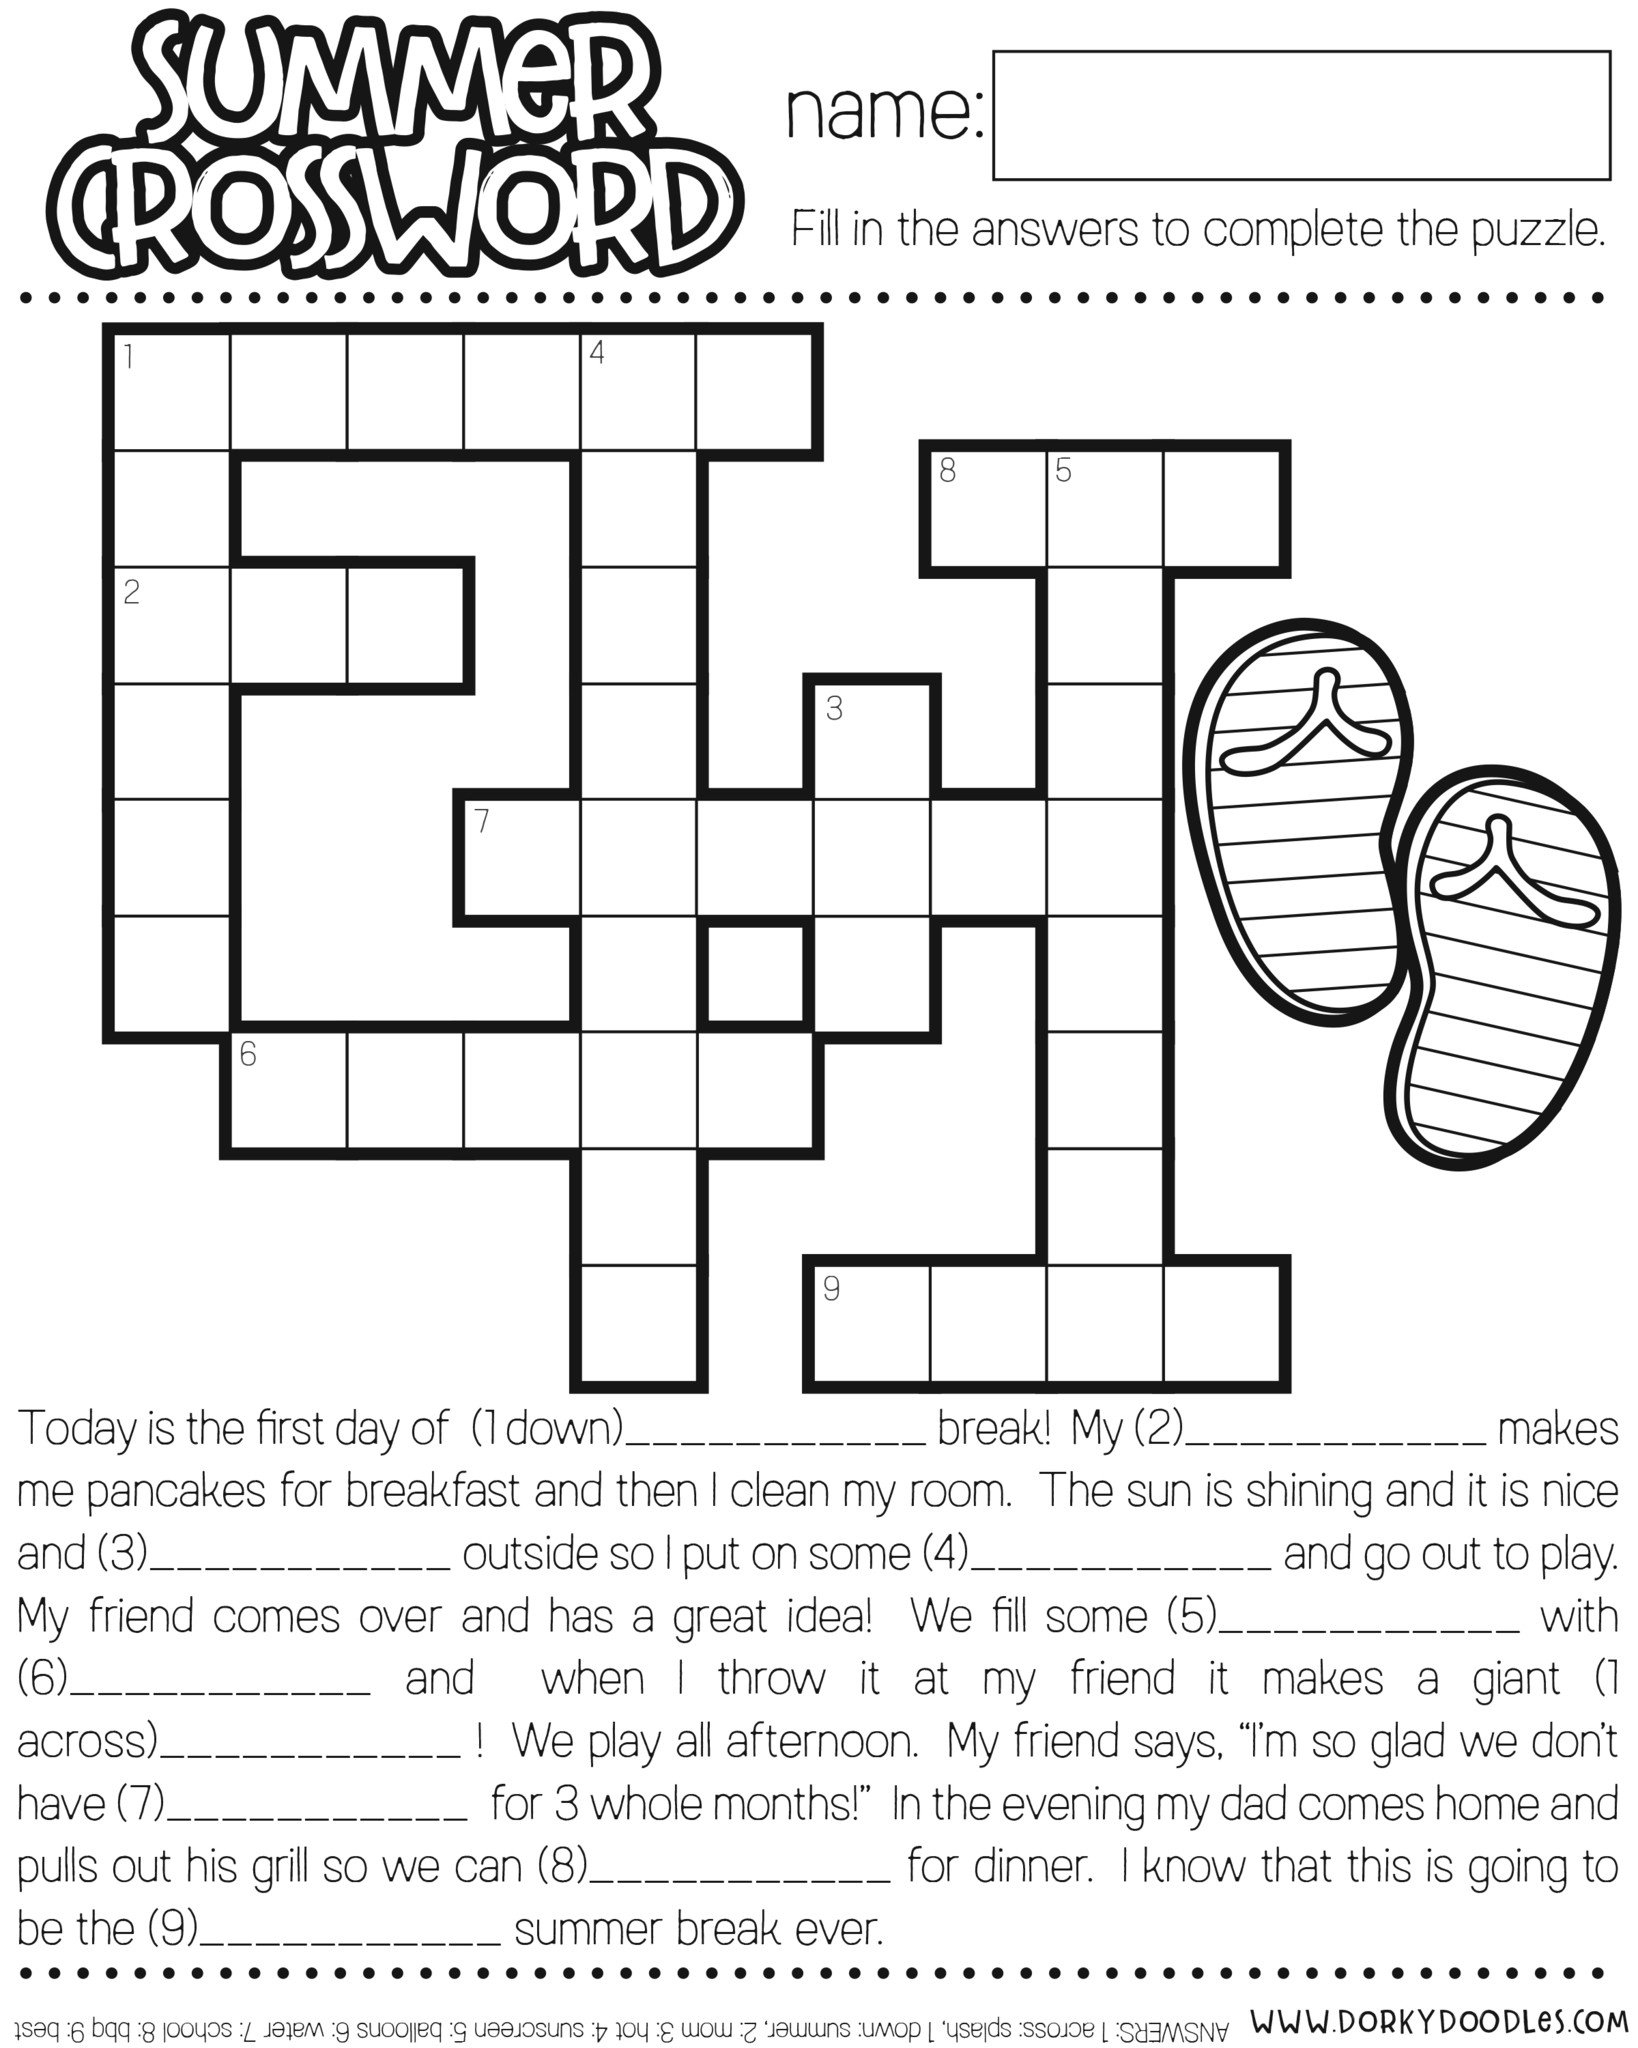 Free Printable Summer Crossword Puzzles | Www.picsbud - Free Printable Summer Puzzles